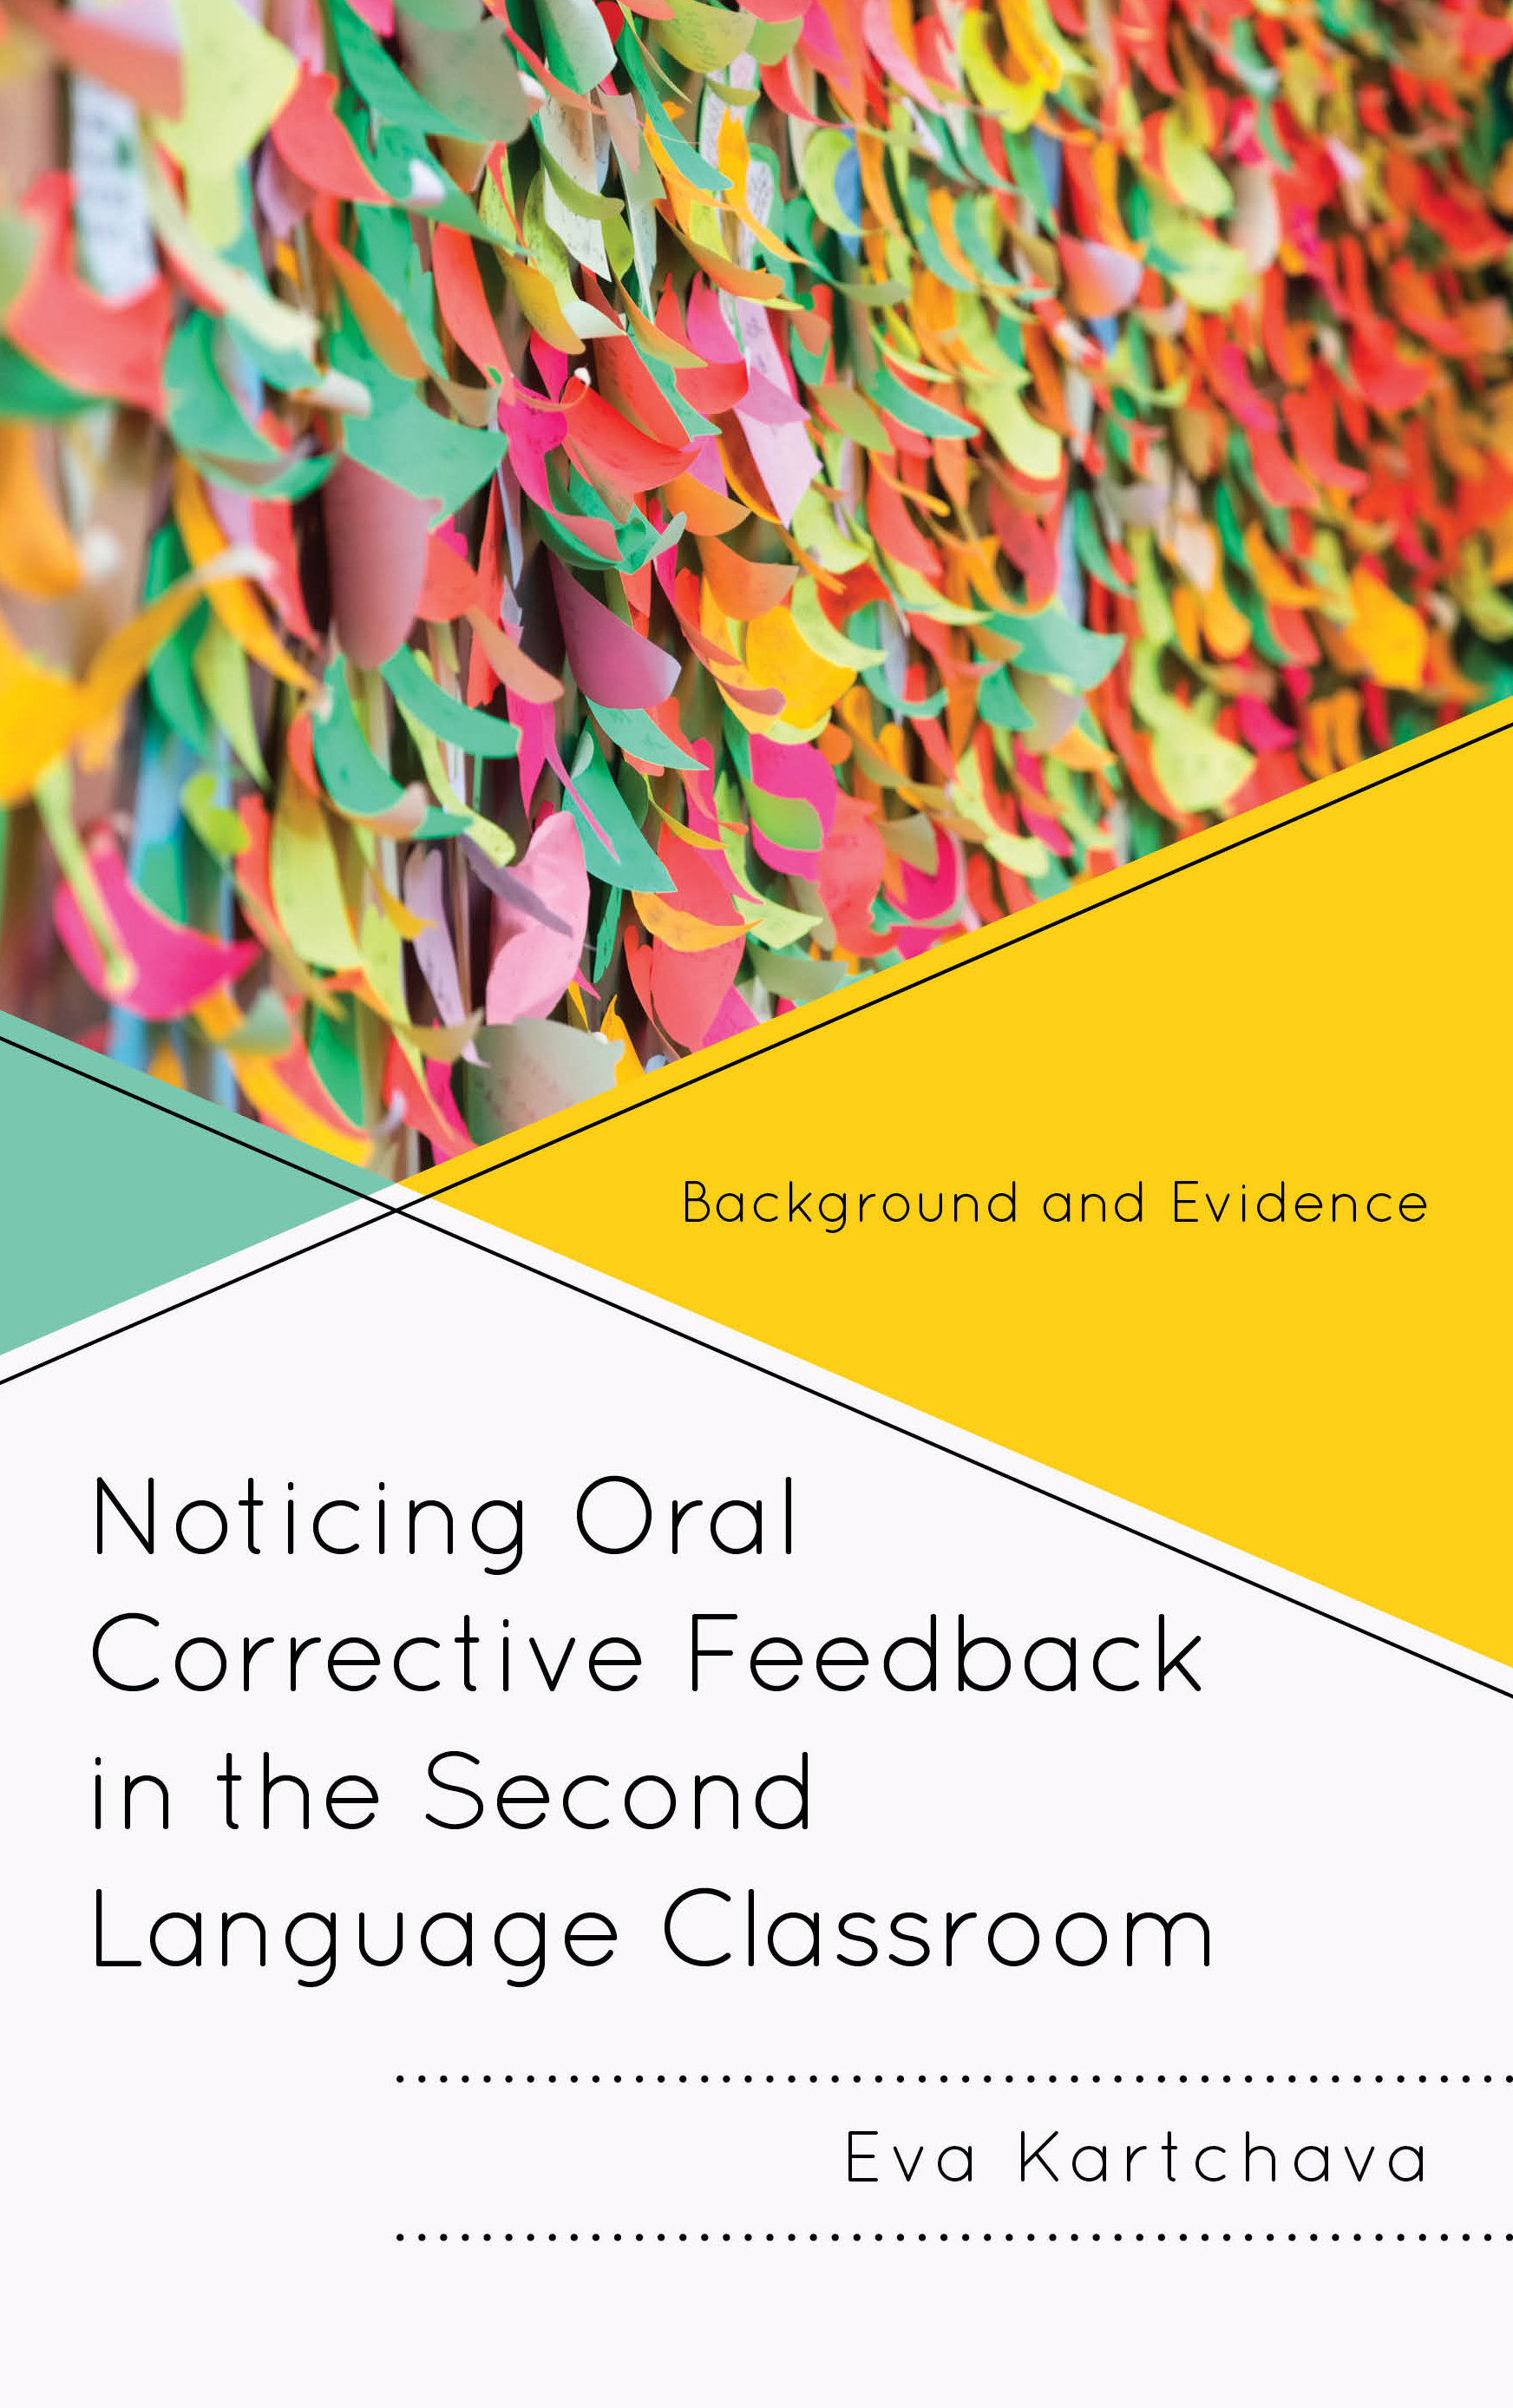 Noticing Oral Corrective Feedback in the Second Language Classroom: Background and Evidence